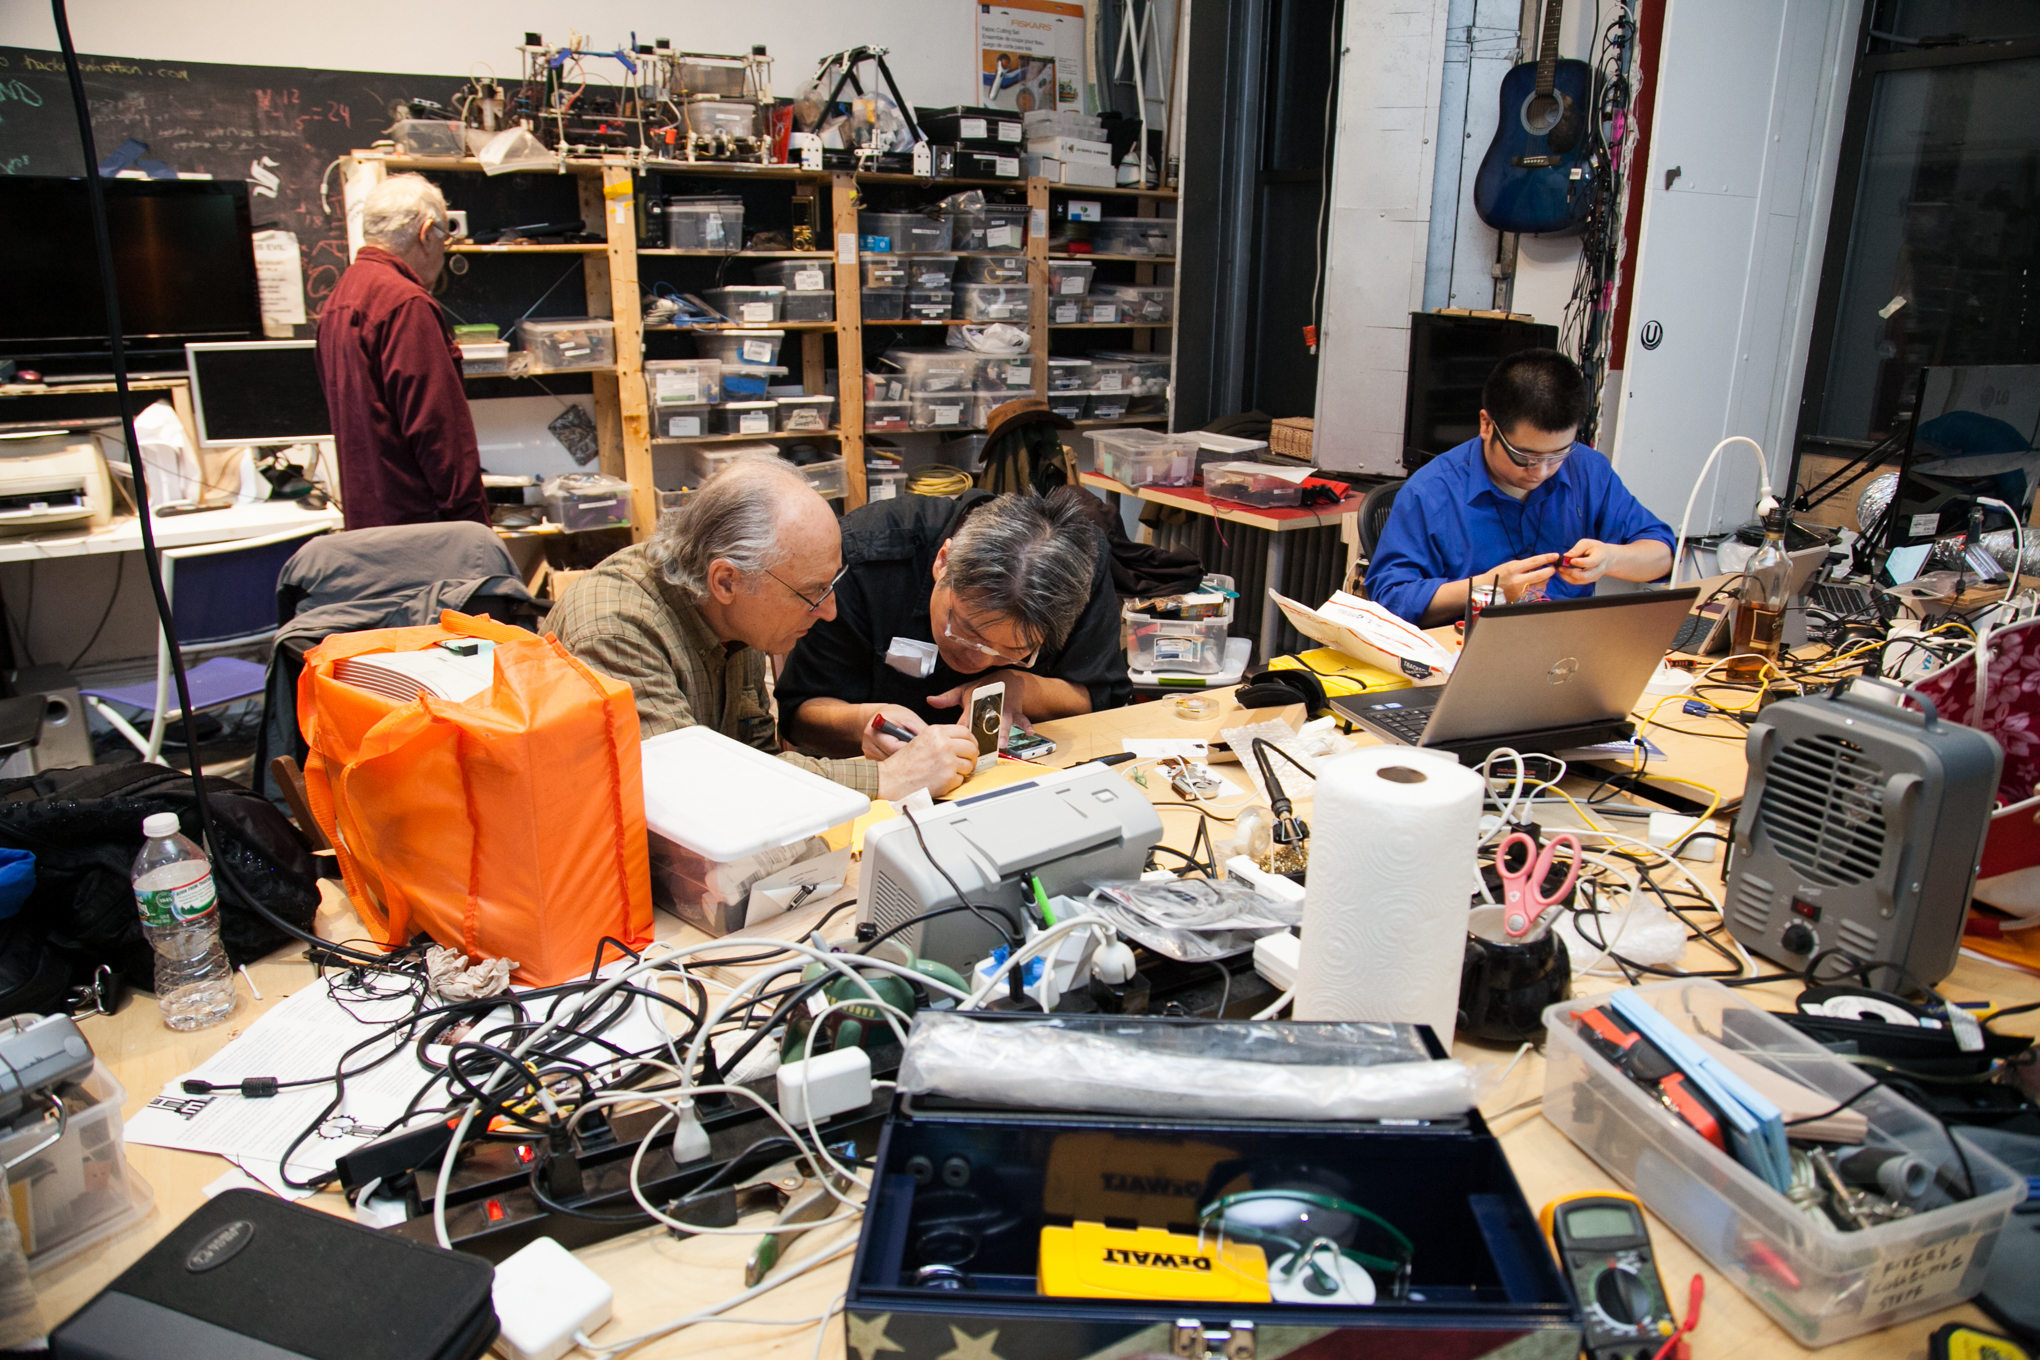 Vincent Lai and Fixers Collective fixing broken stuff in NYC